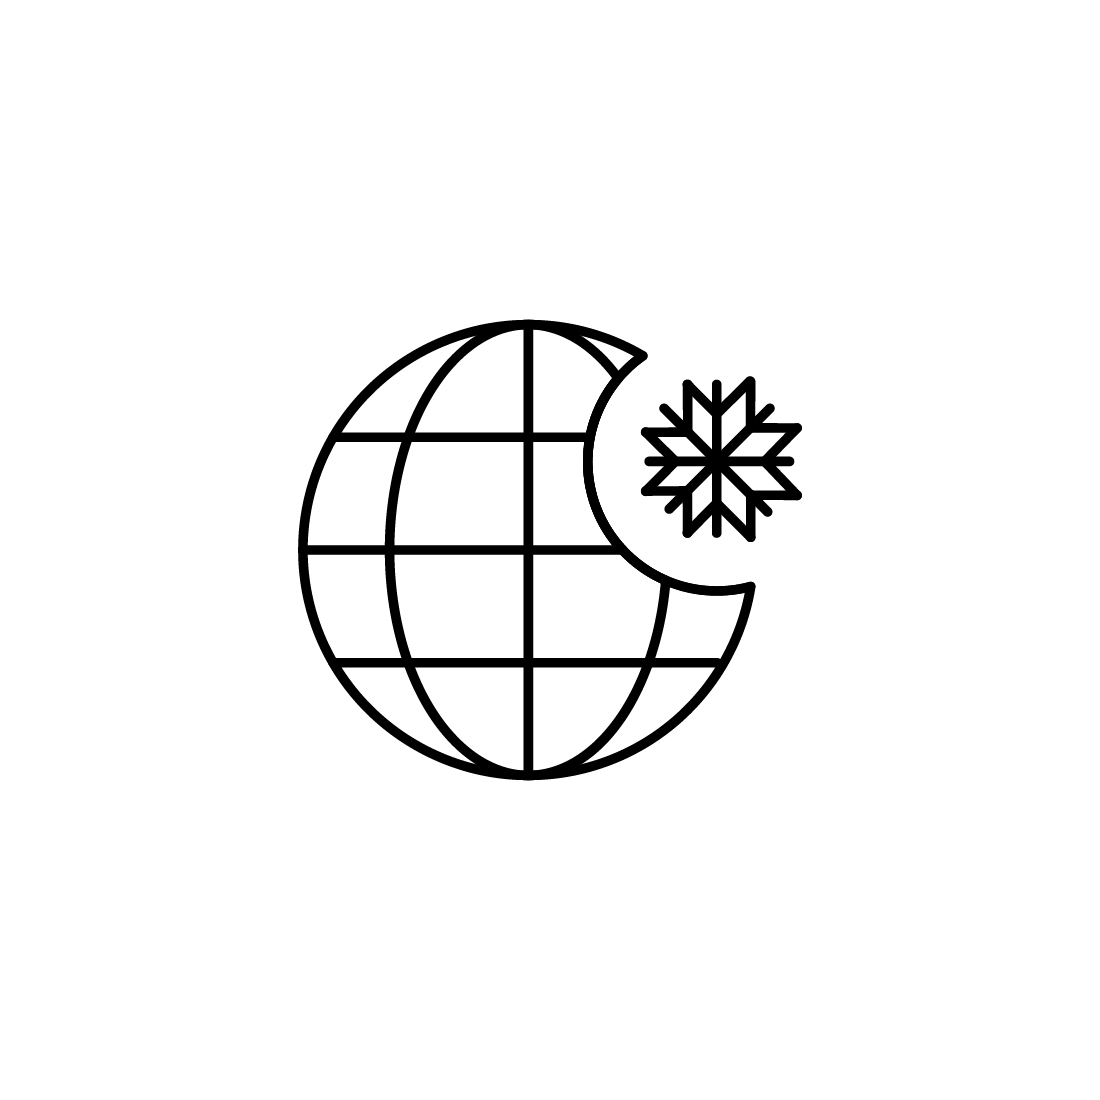 Black and white image of a globe with a snowflake.